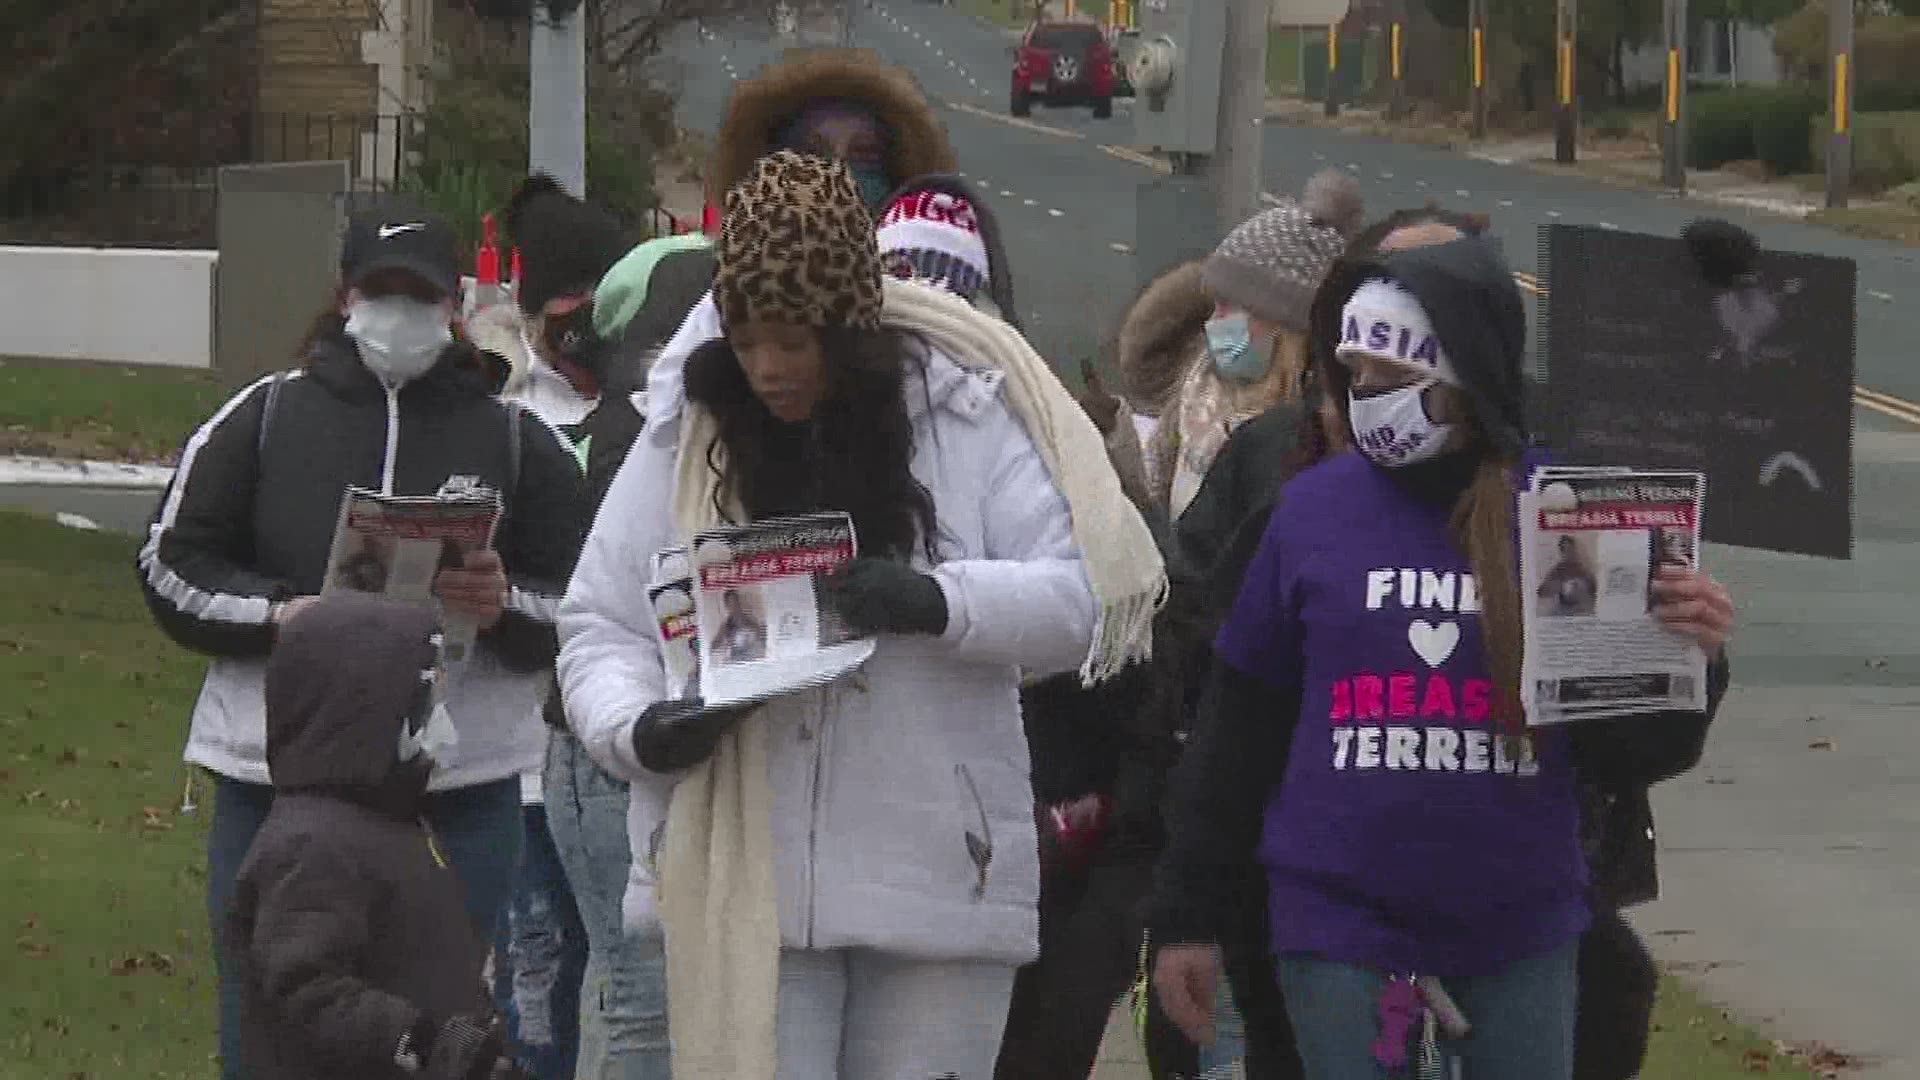 The two marches over the weekend included gathering on busy street corners throughout Davenport, holding signs and pictures and passing out fliers.